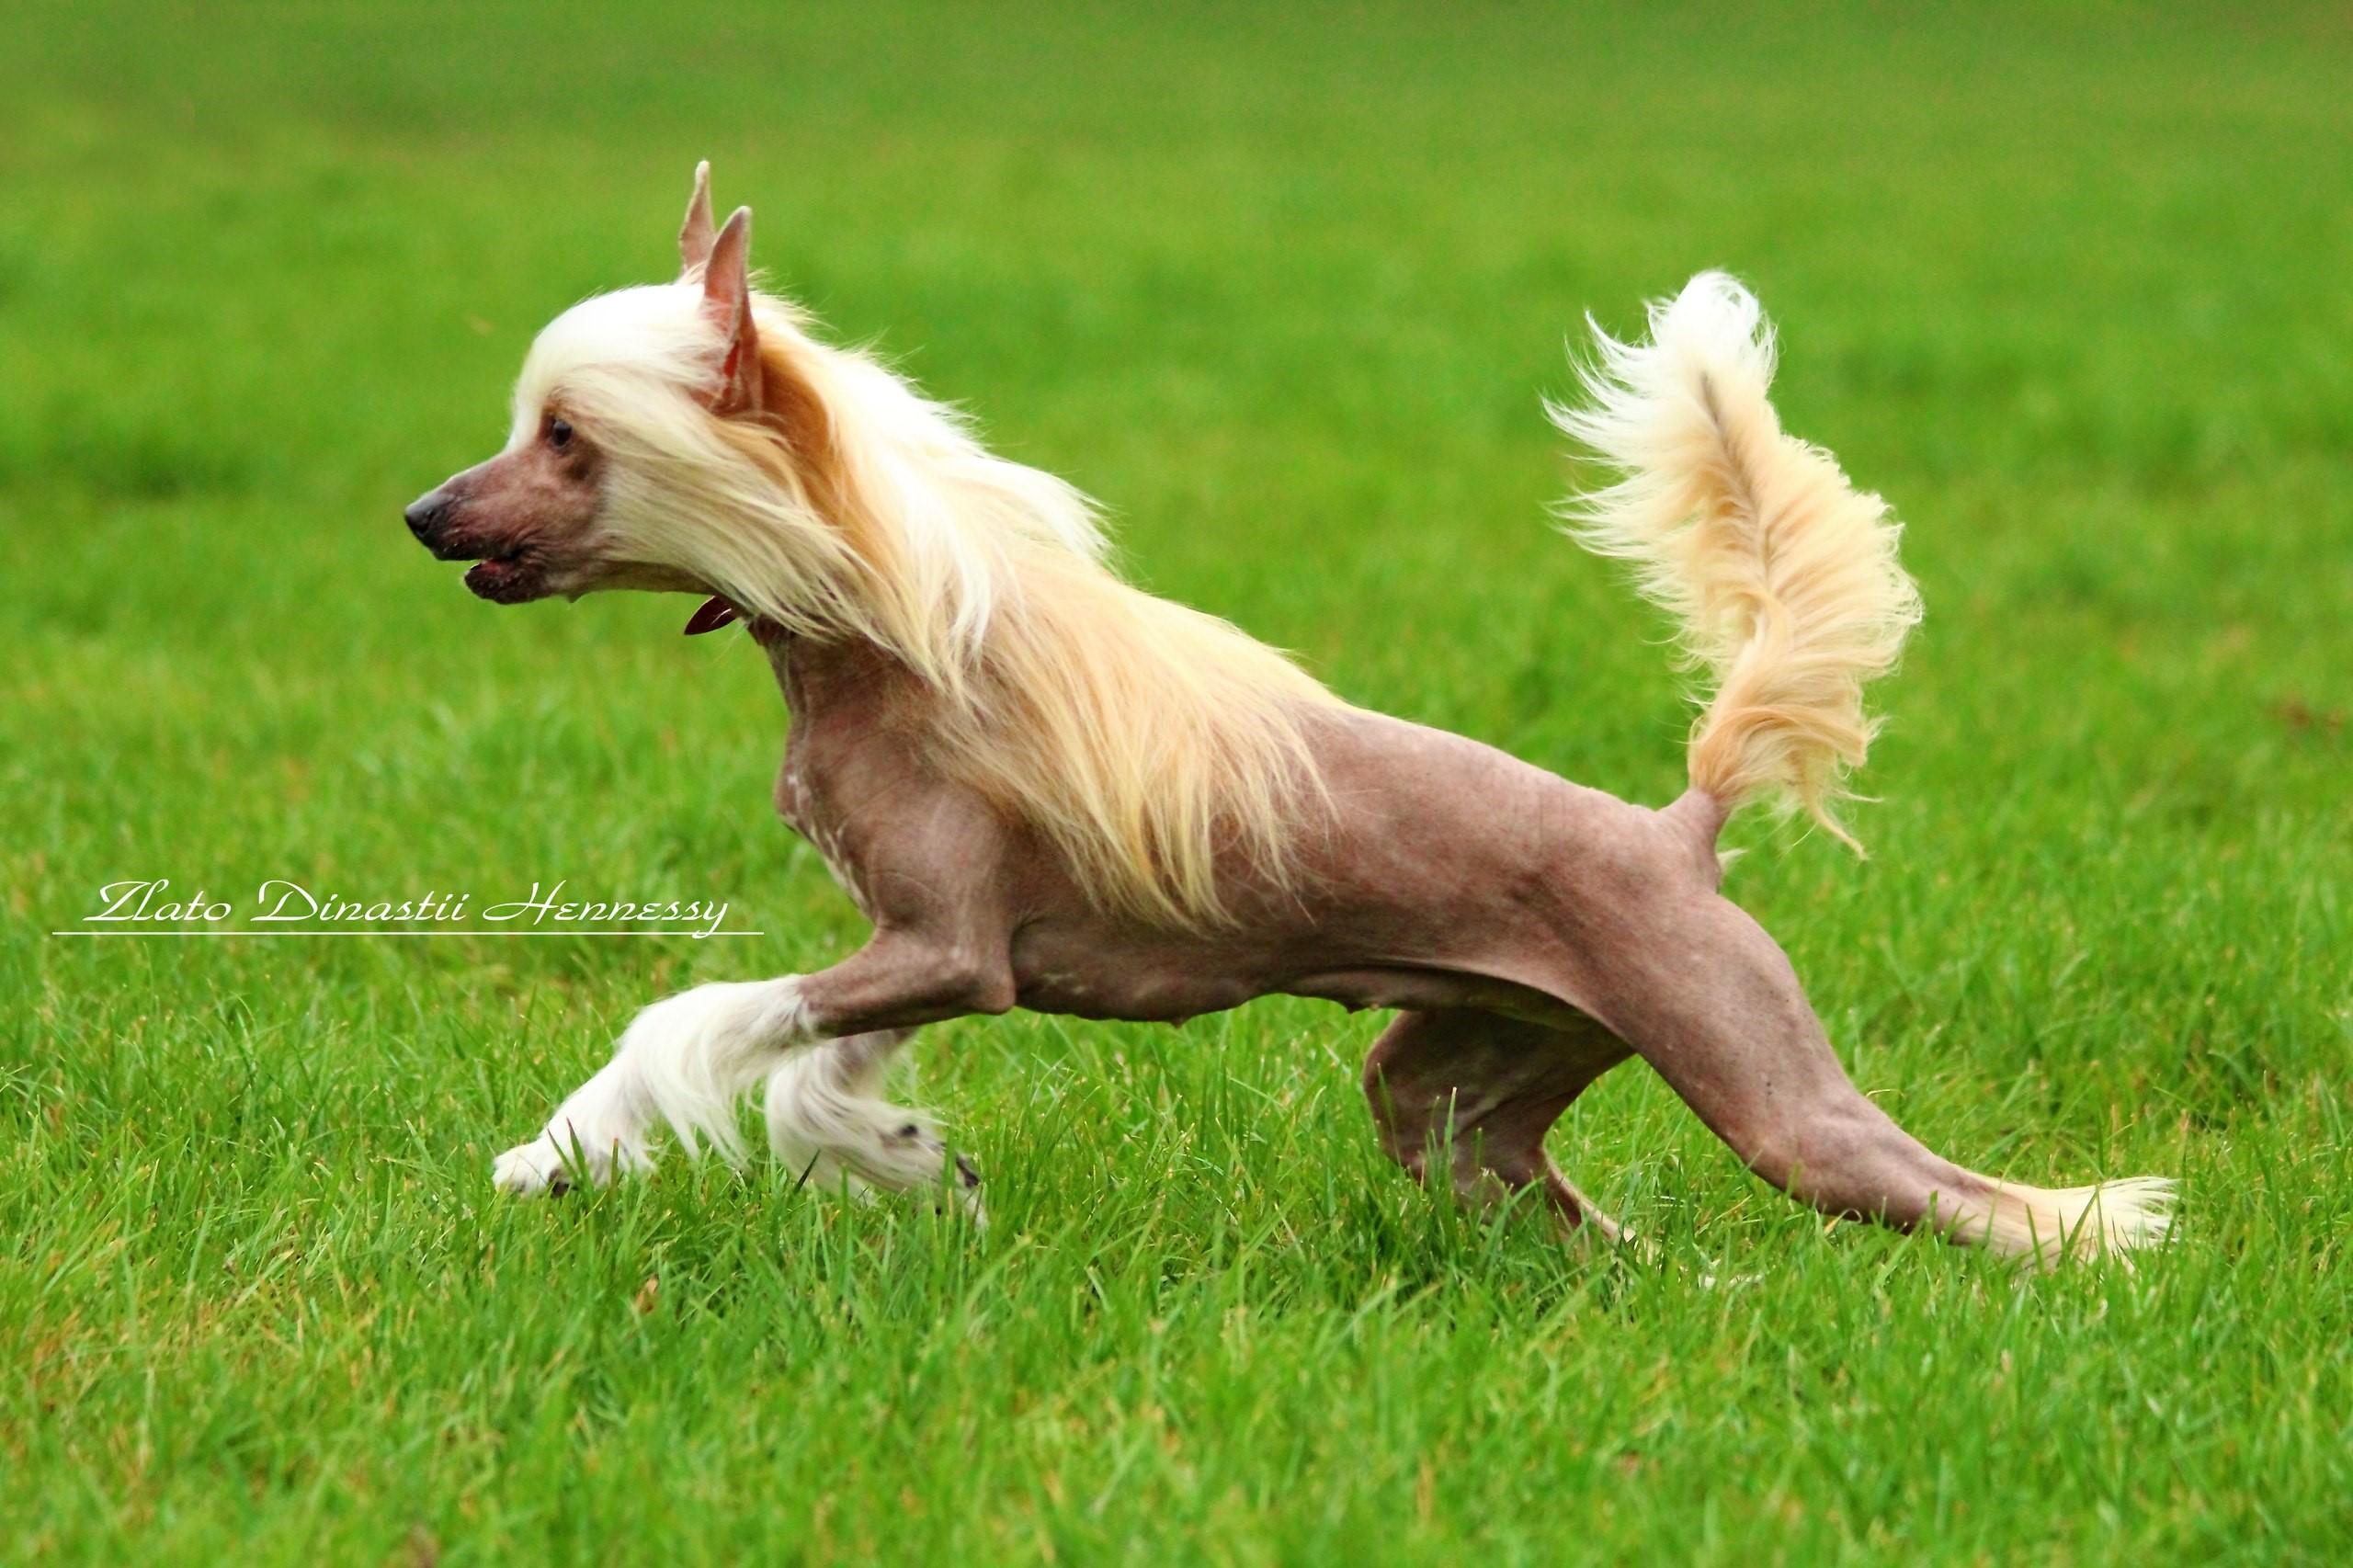 776074 Dogs Chinese Crested Grass   Rare Gallery HD Wallpapers